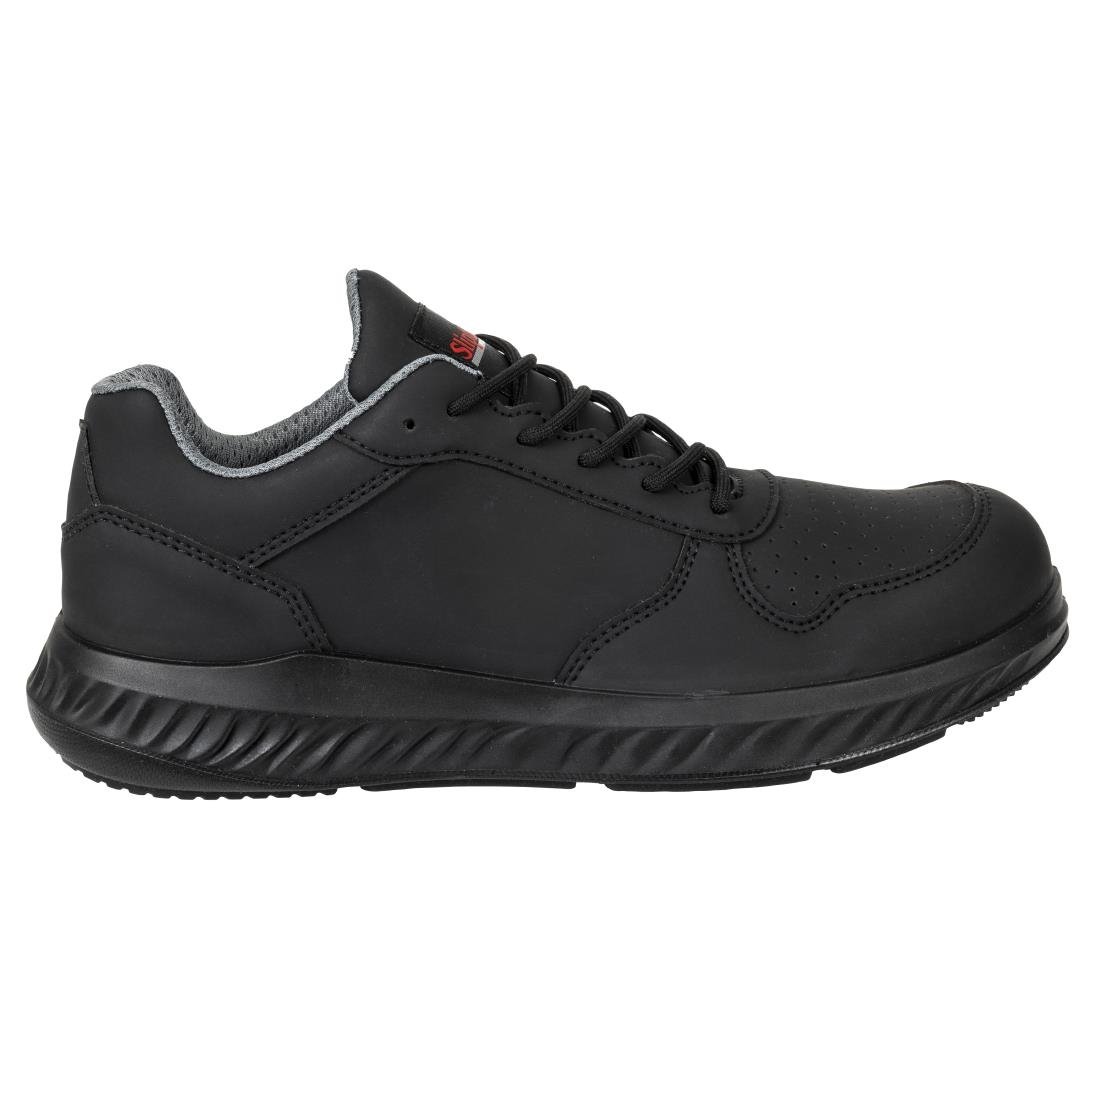 BA063-42 Slipbuster Recycled Microfibre Trainers Matte Black 42 JD Catering Equipment Solutions Ltd